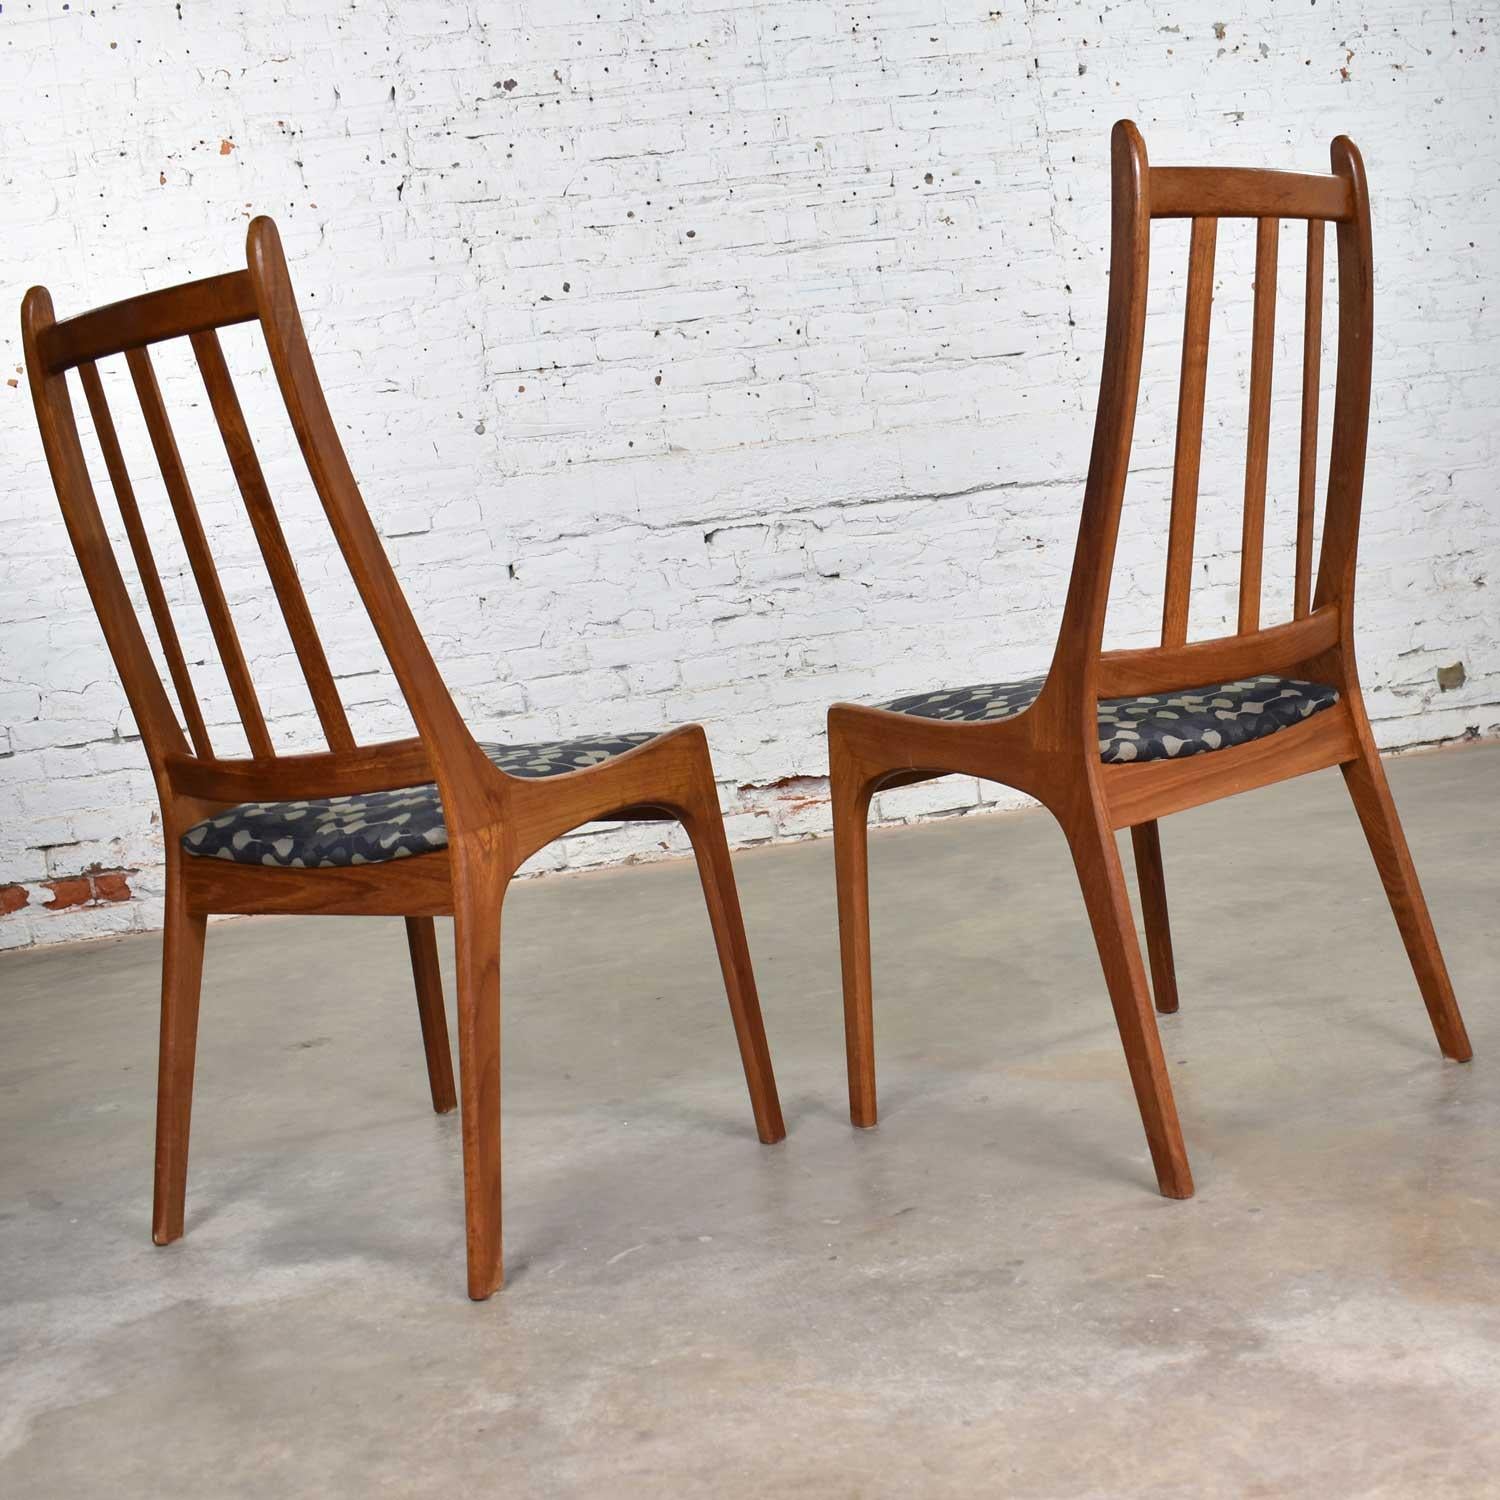 Handsome pair of teak Scandinavian Modern side chairs by Nordic Furniture Company of Markdale, Ontario, Canada. They are in fabulous vintage condition with new geometric upholstery fabric. Please see photos, circa 1970s.

Danish